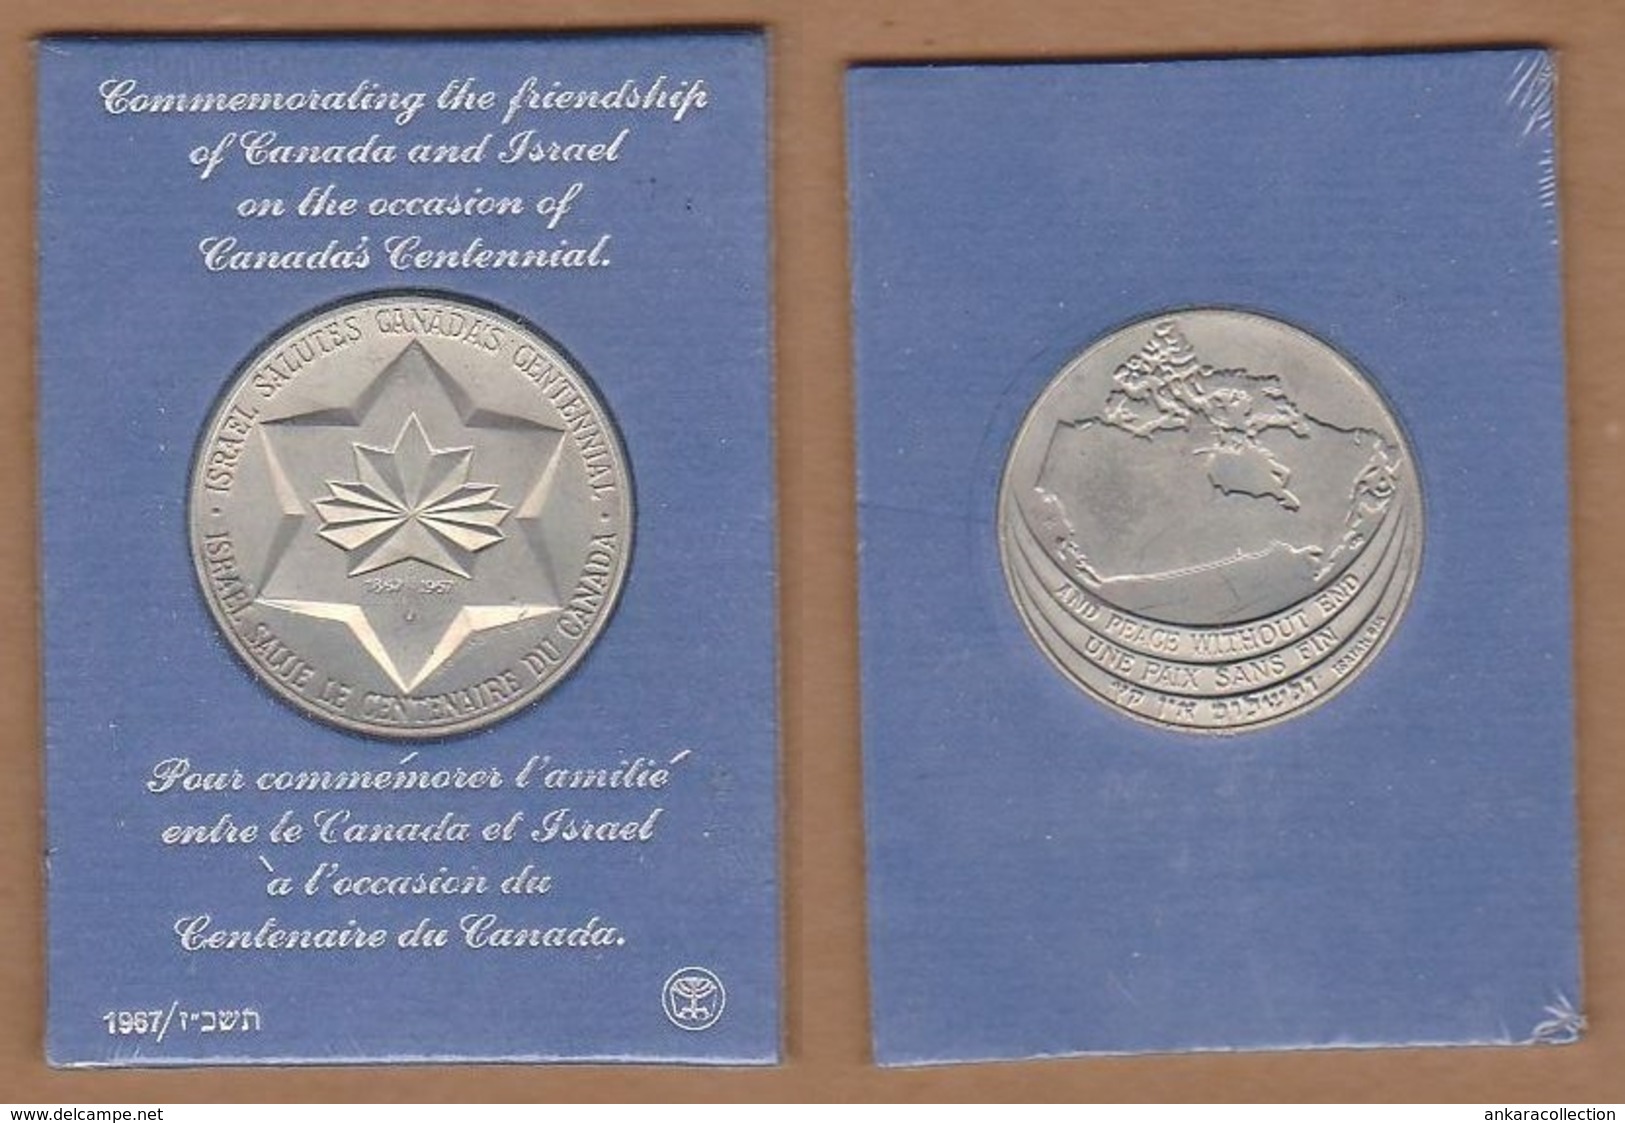 AC - COMMEMORATING THE FRIENDSHIP OF CANADA AND ISRAEL ON THE OCCASION OF CANADA'S CENTENNIAL 1967 MEDAL MEDALLION - Royal / Of Nobility